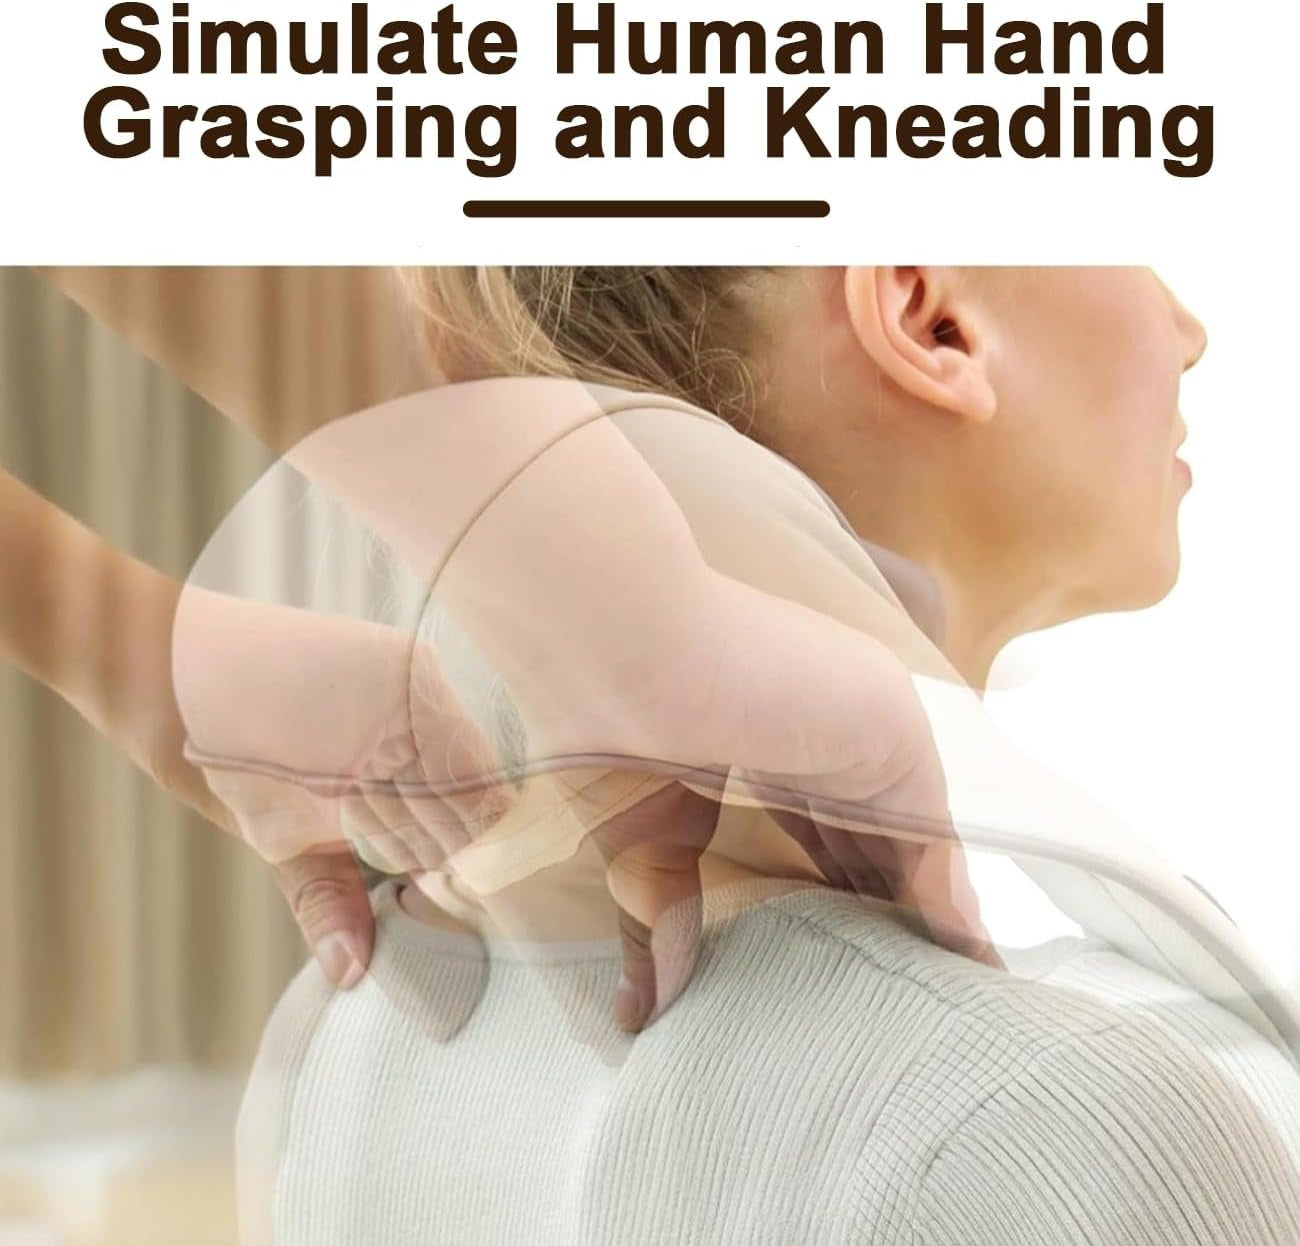 stimulate human hand grasping and kneading